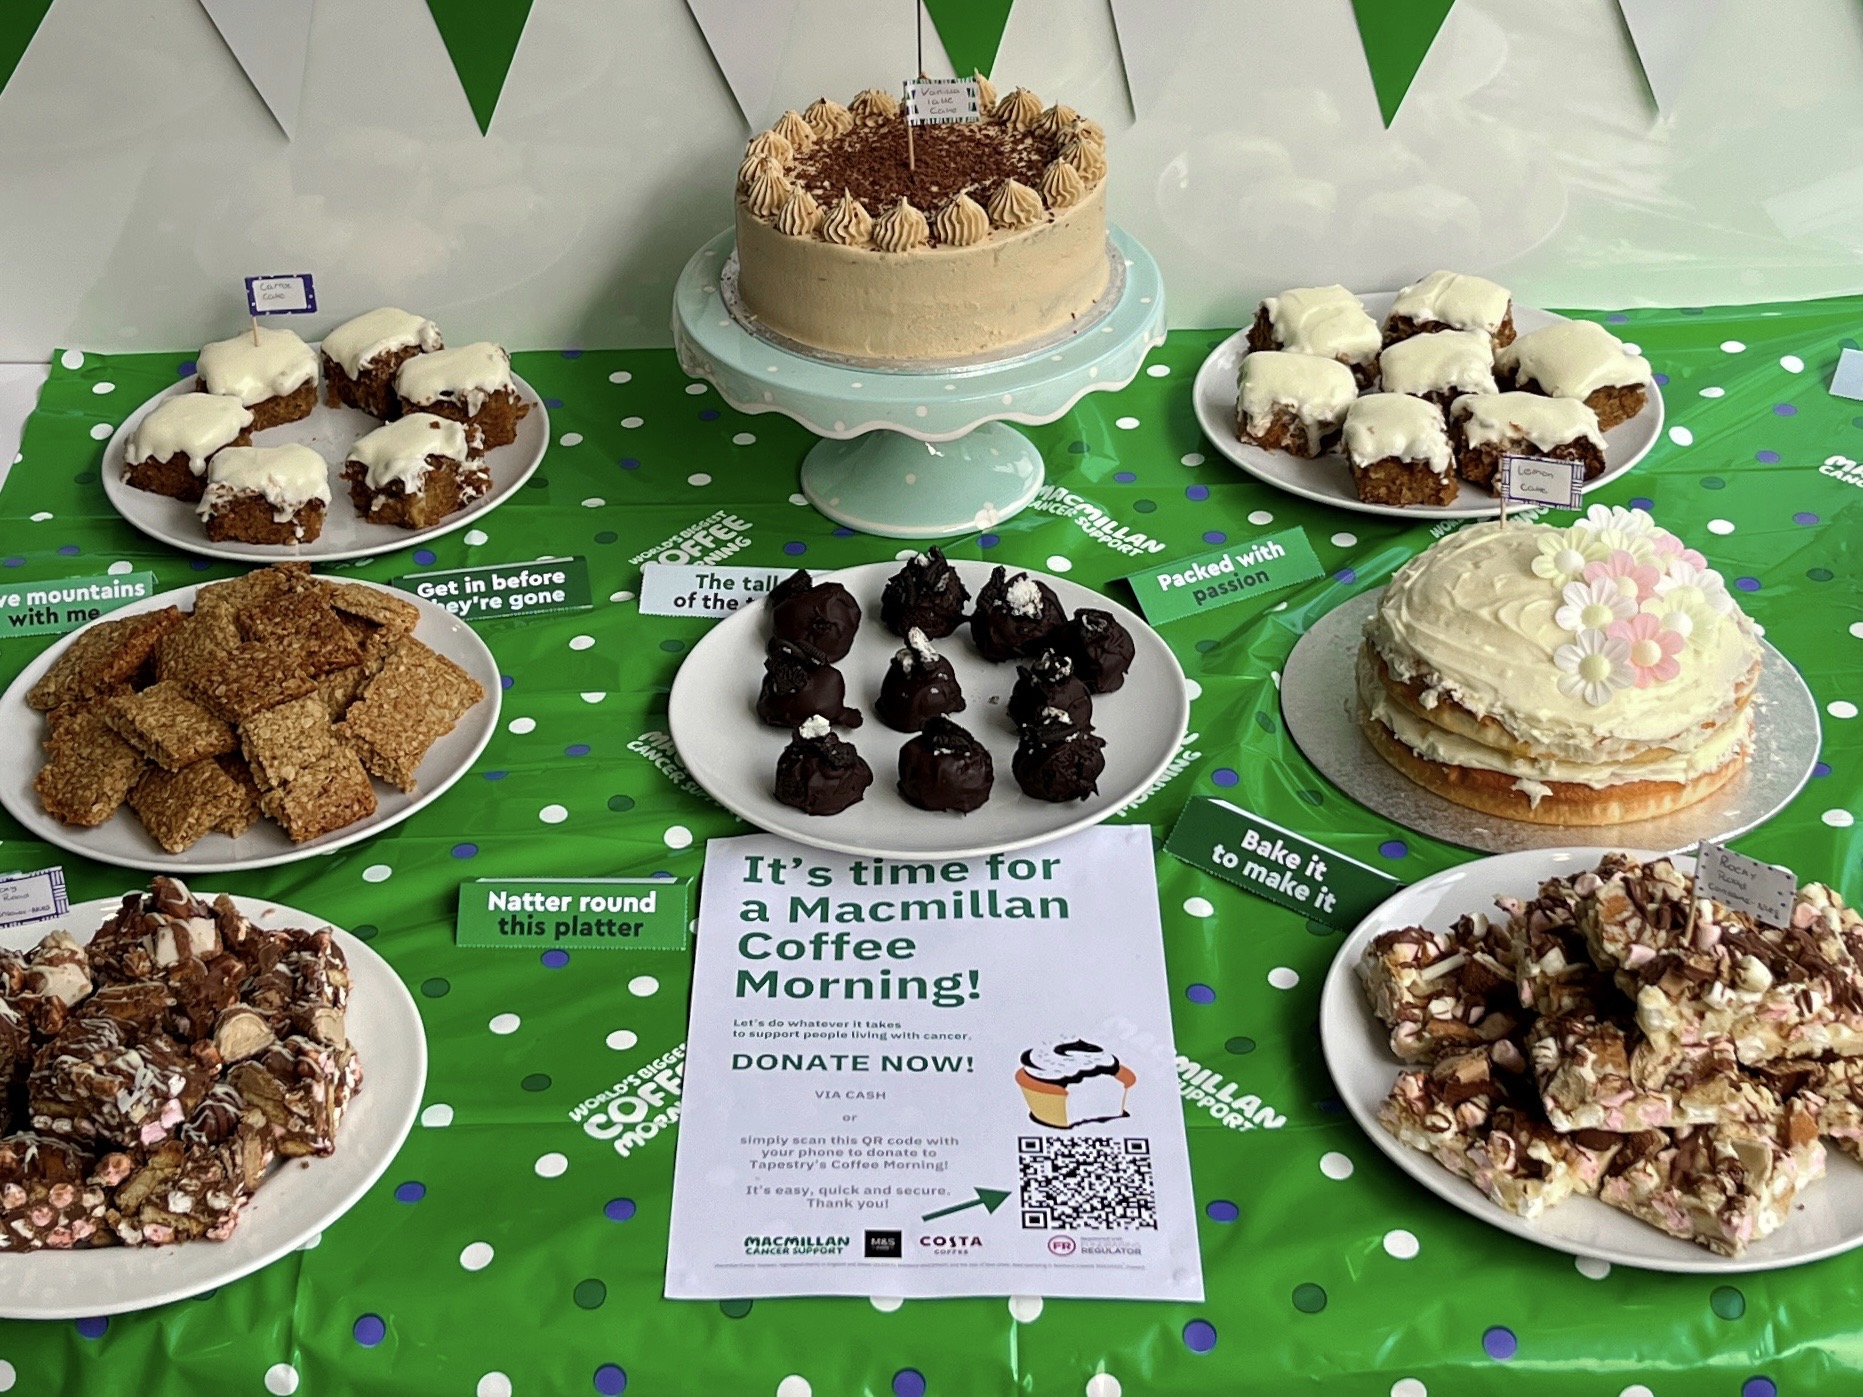 Tapestry-soho-frith-street-london-macmillan-cancer-support-the-worlds-biggest-coffee-morning-research-charity-bake-sale-fundraiser-autumn 